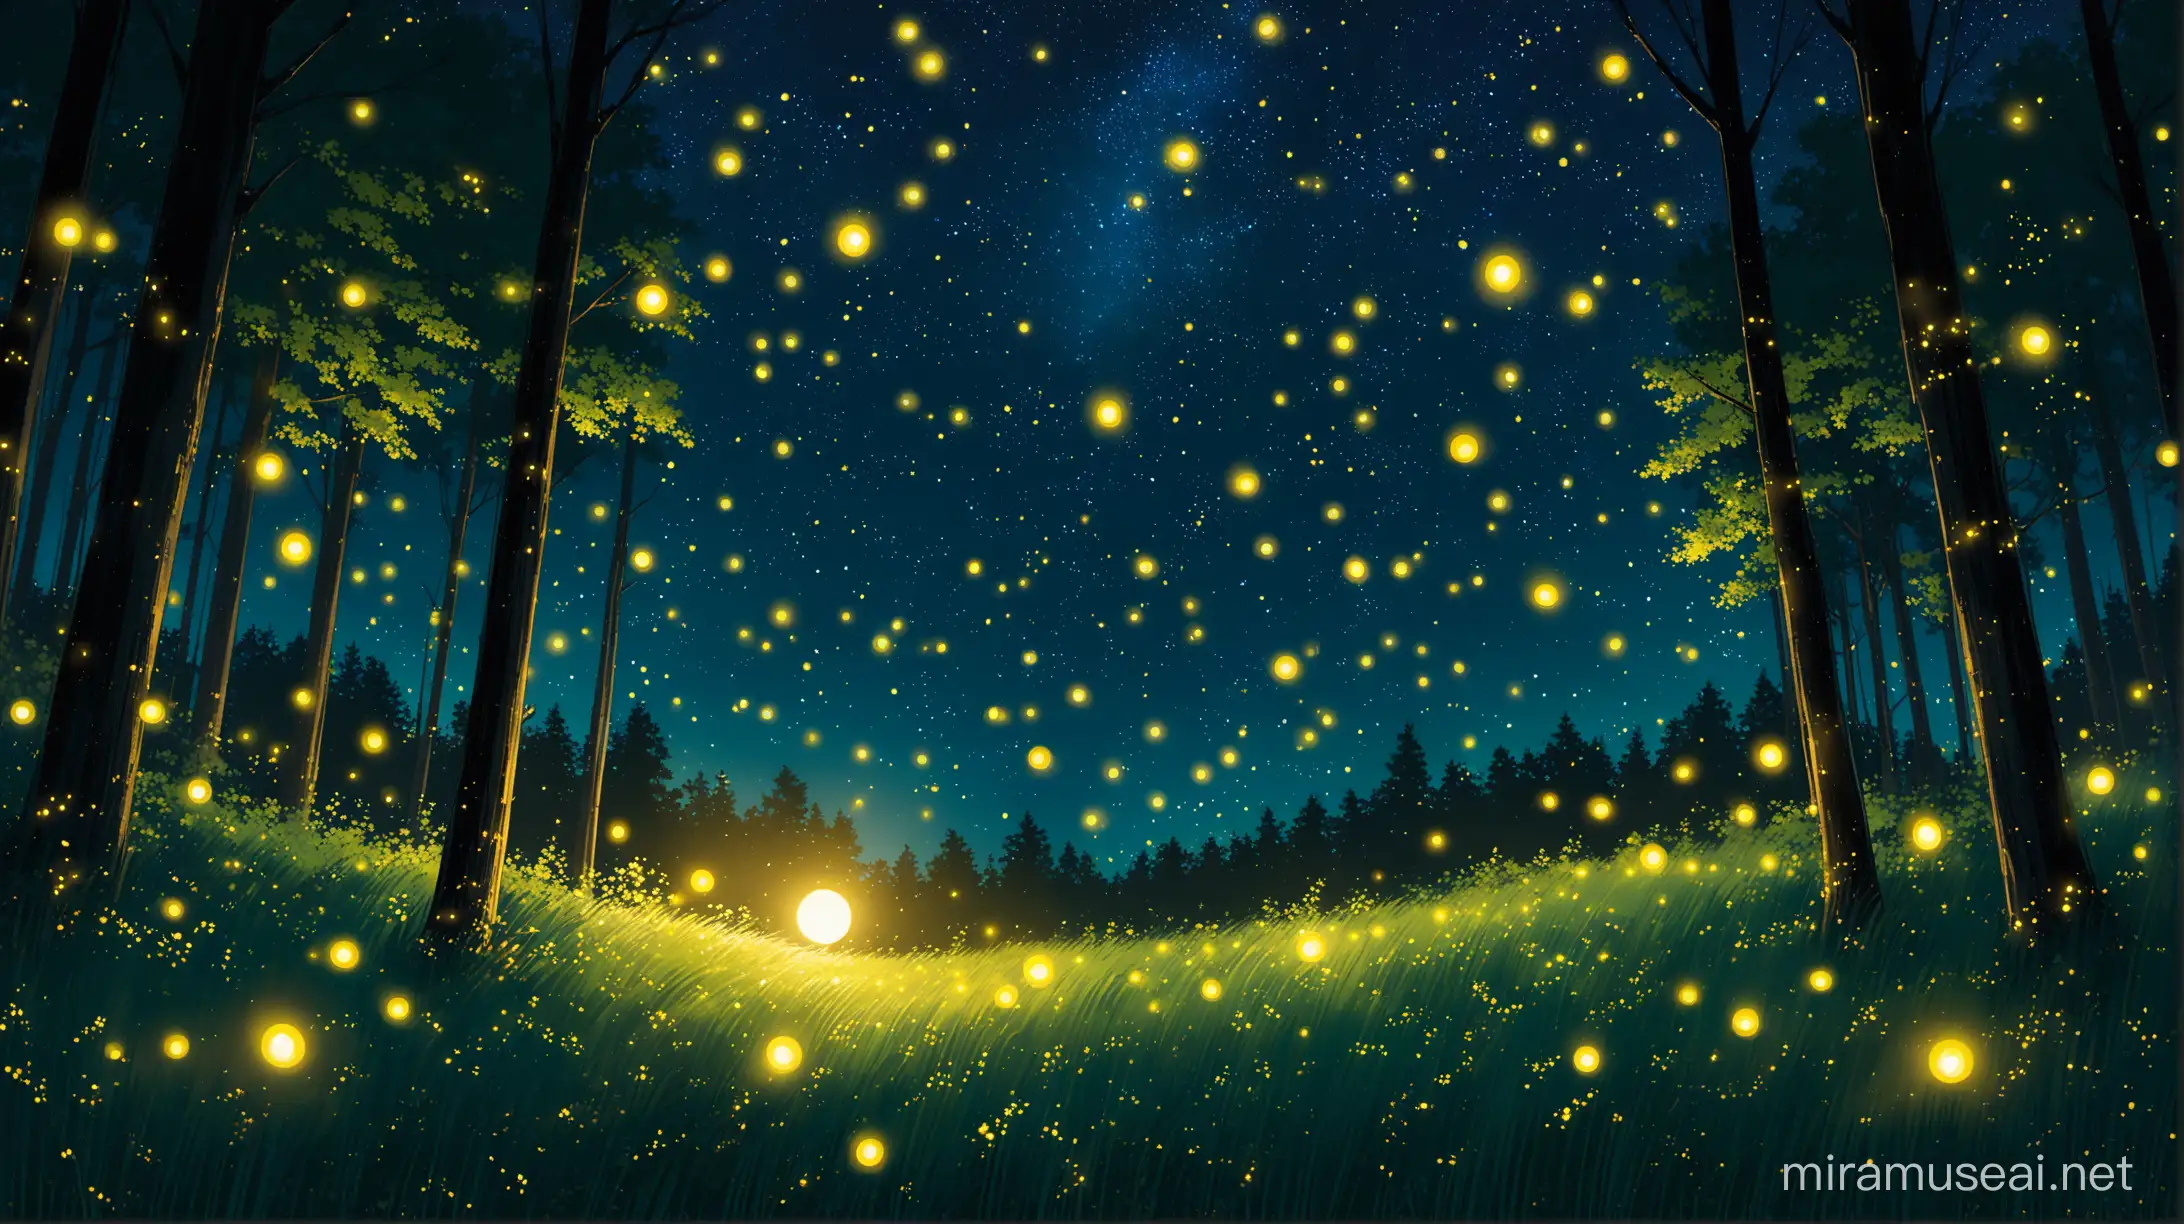 a strong wind blew out all the fireflies' lights in the forest at night